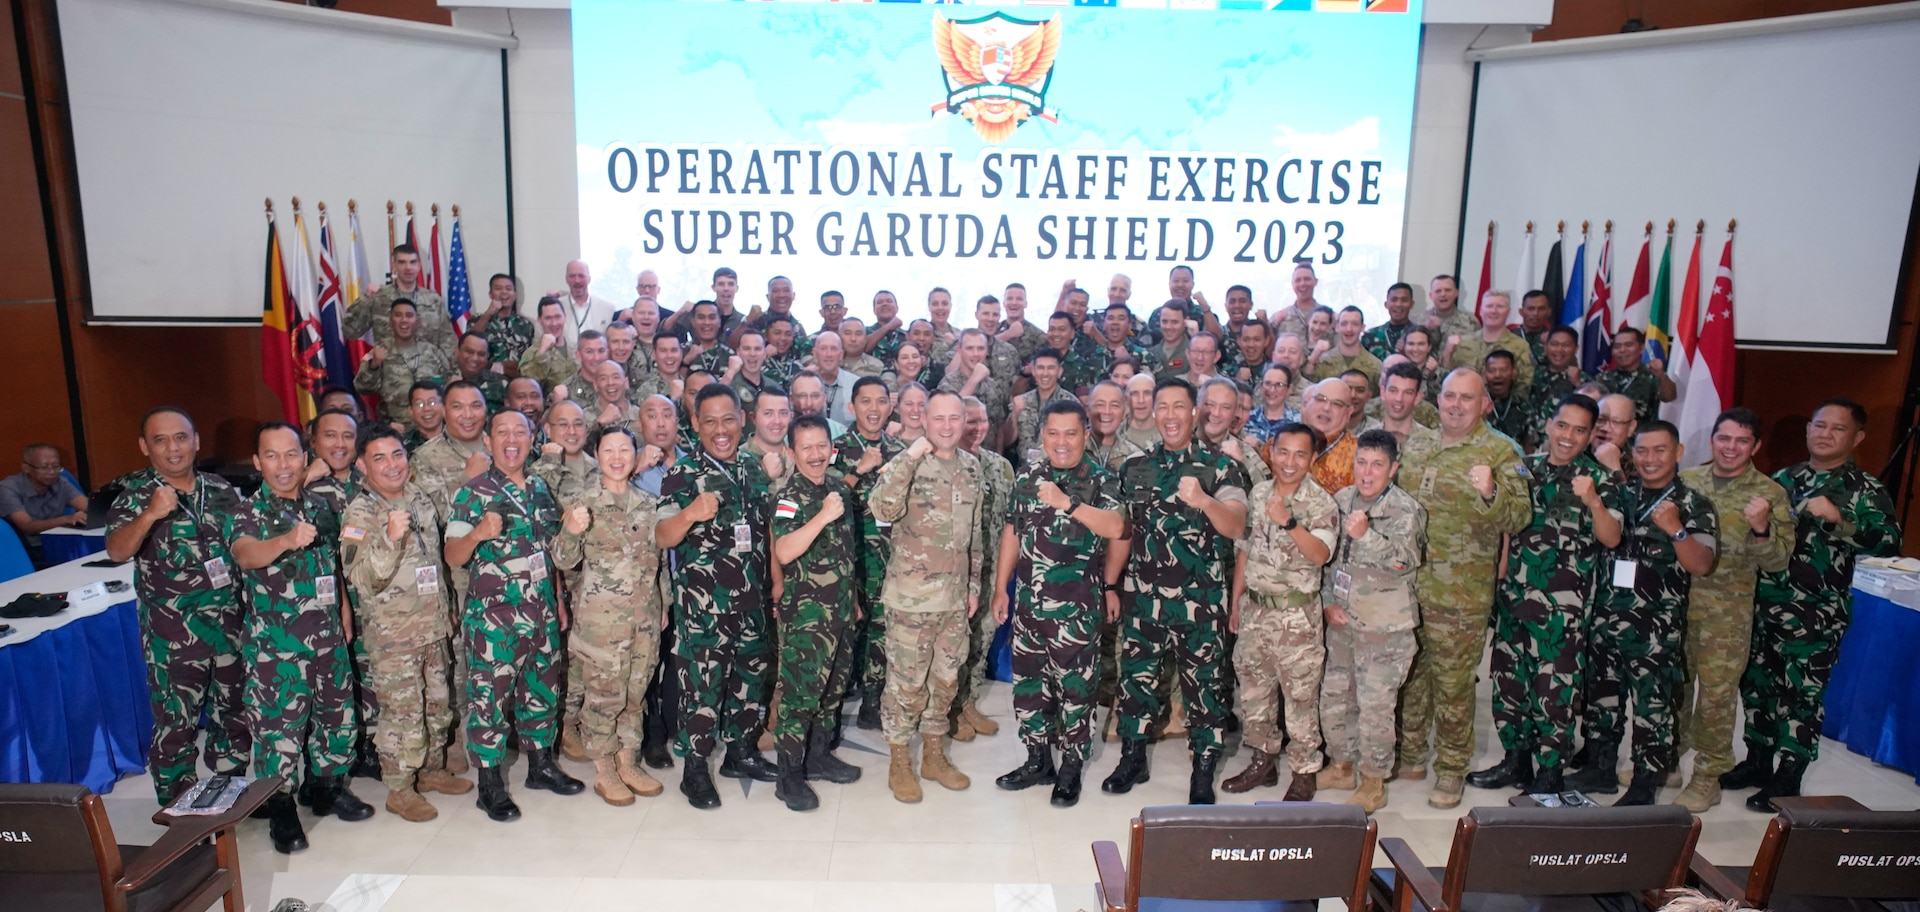 The participants of staff exercise portion of Super Garuda Shield 2023 (SGS23) pose for a group photo after the opening ceremony, August 31, 2023, Surabaya Indonesia. #SuperGarudaShield 2023 is an annual exercise that has significantly grown in scope and size since 2009. #SGS2023 is the second consecutive time this exercise has grown into a combined and #joint event, highlighting the 6 participating and 12 observing nations’ commitment to #partnership and a #freeandopenindopacific. (US Air National Guard Photo by Air Force Master Sgt. Andrew Lee Jackson)